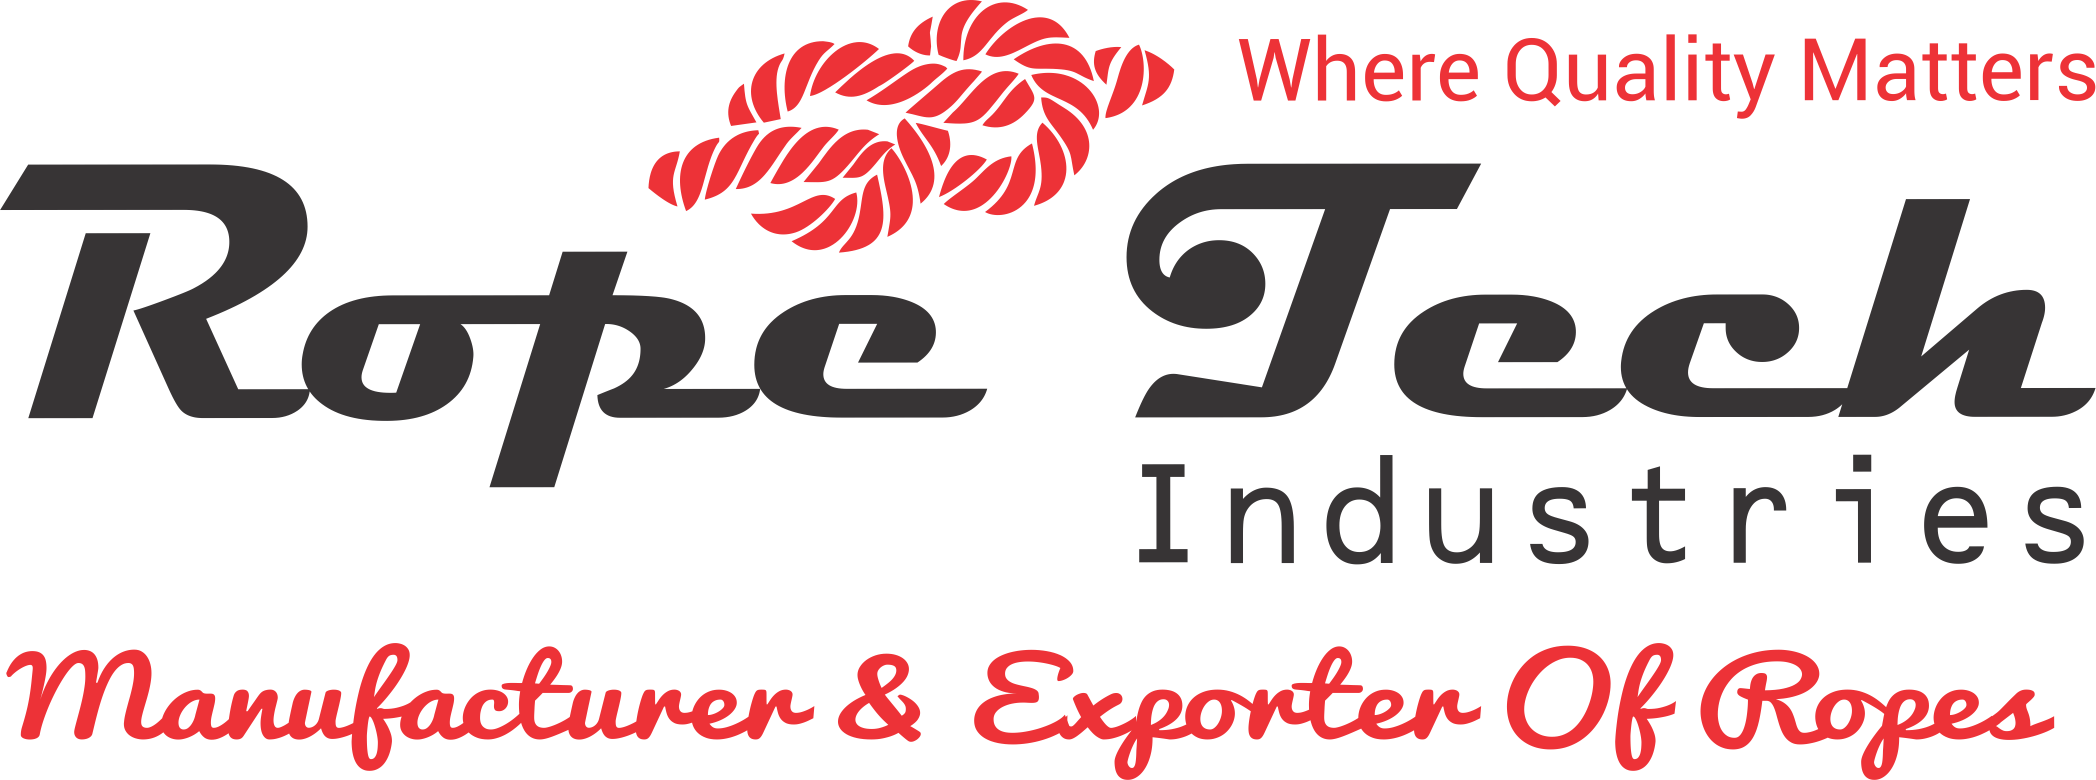 Ropetech Industries